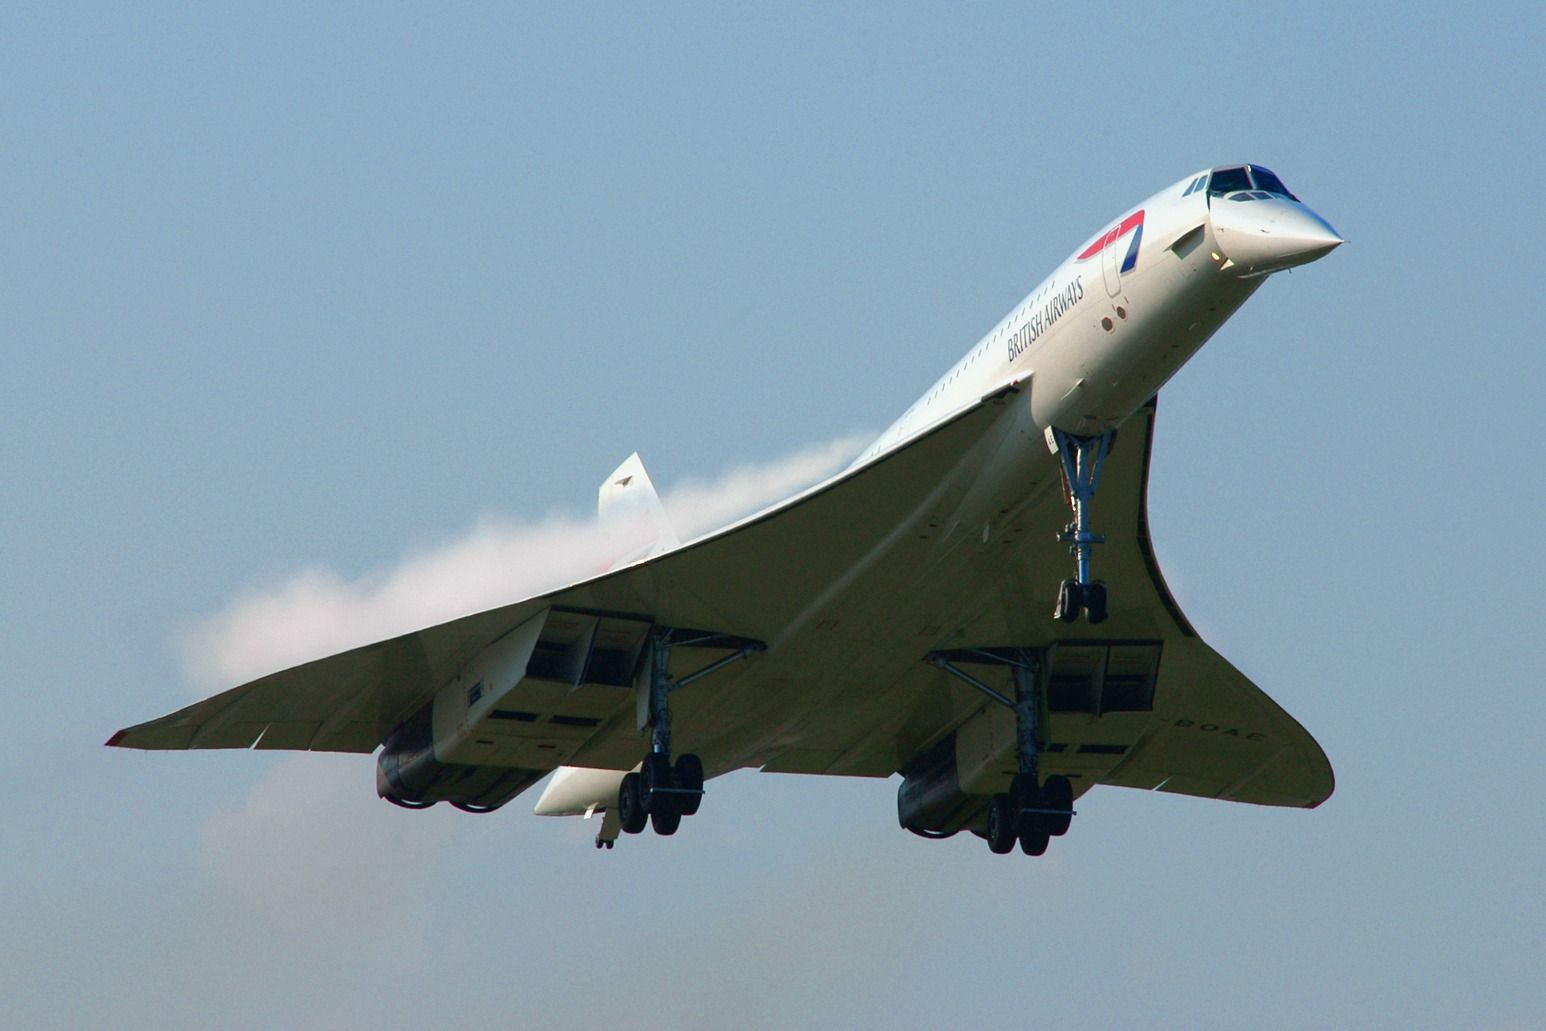 A British Airways Concorde flying in the sky.